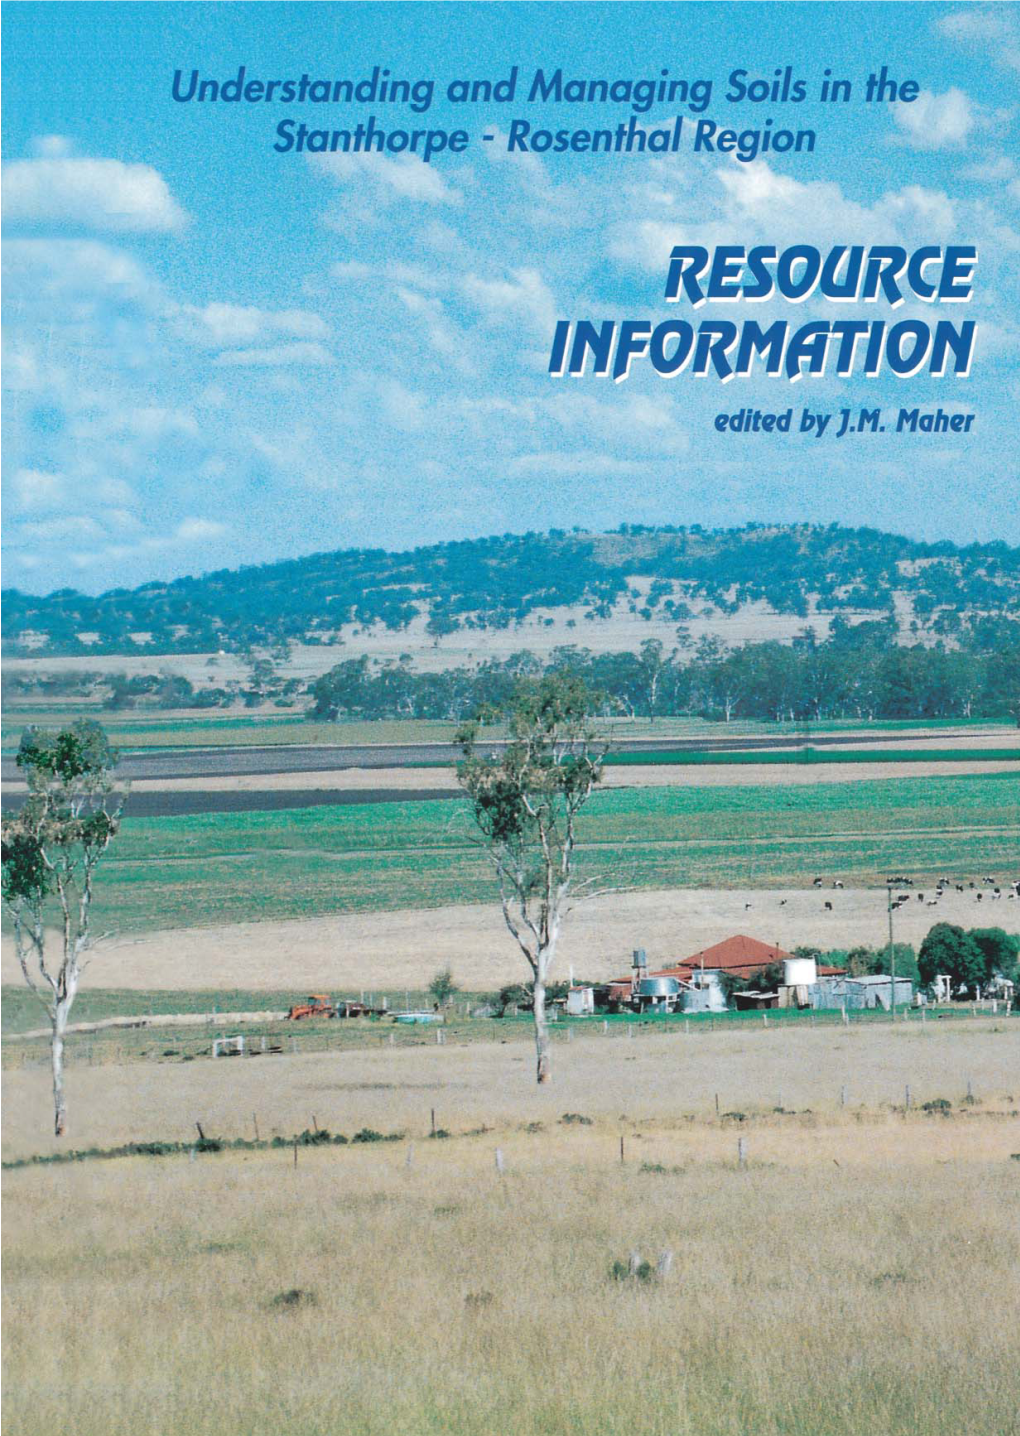 Understanding and Managing Soils in the Stanthorpe-Rosenthal Region